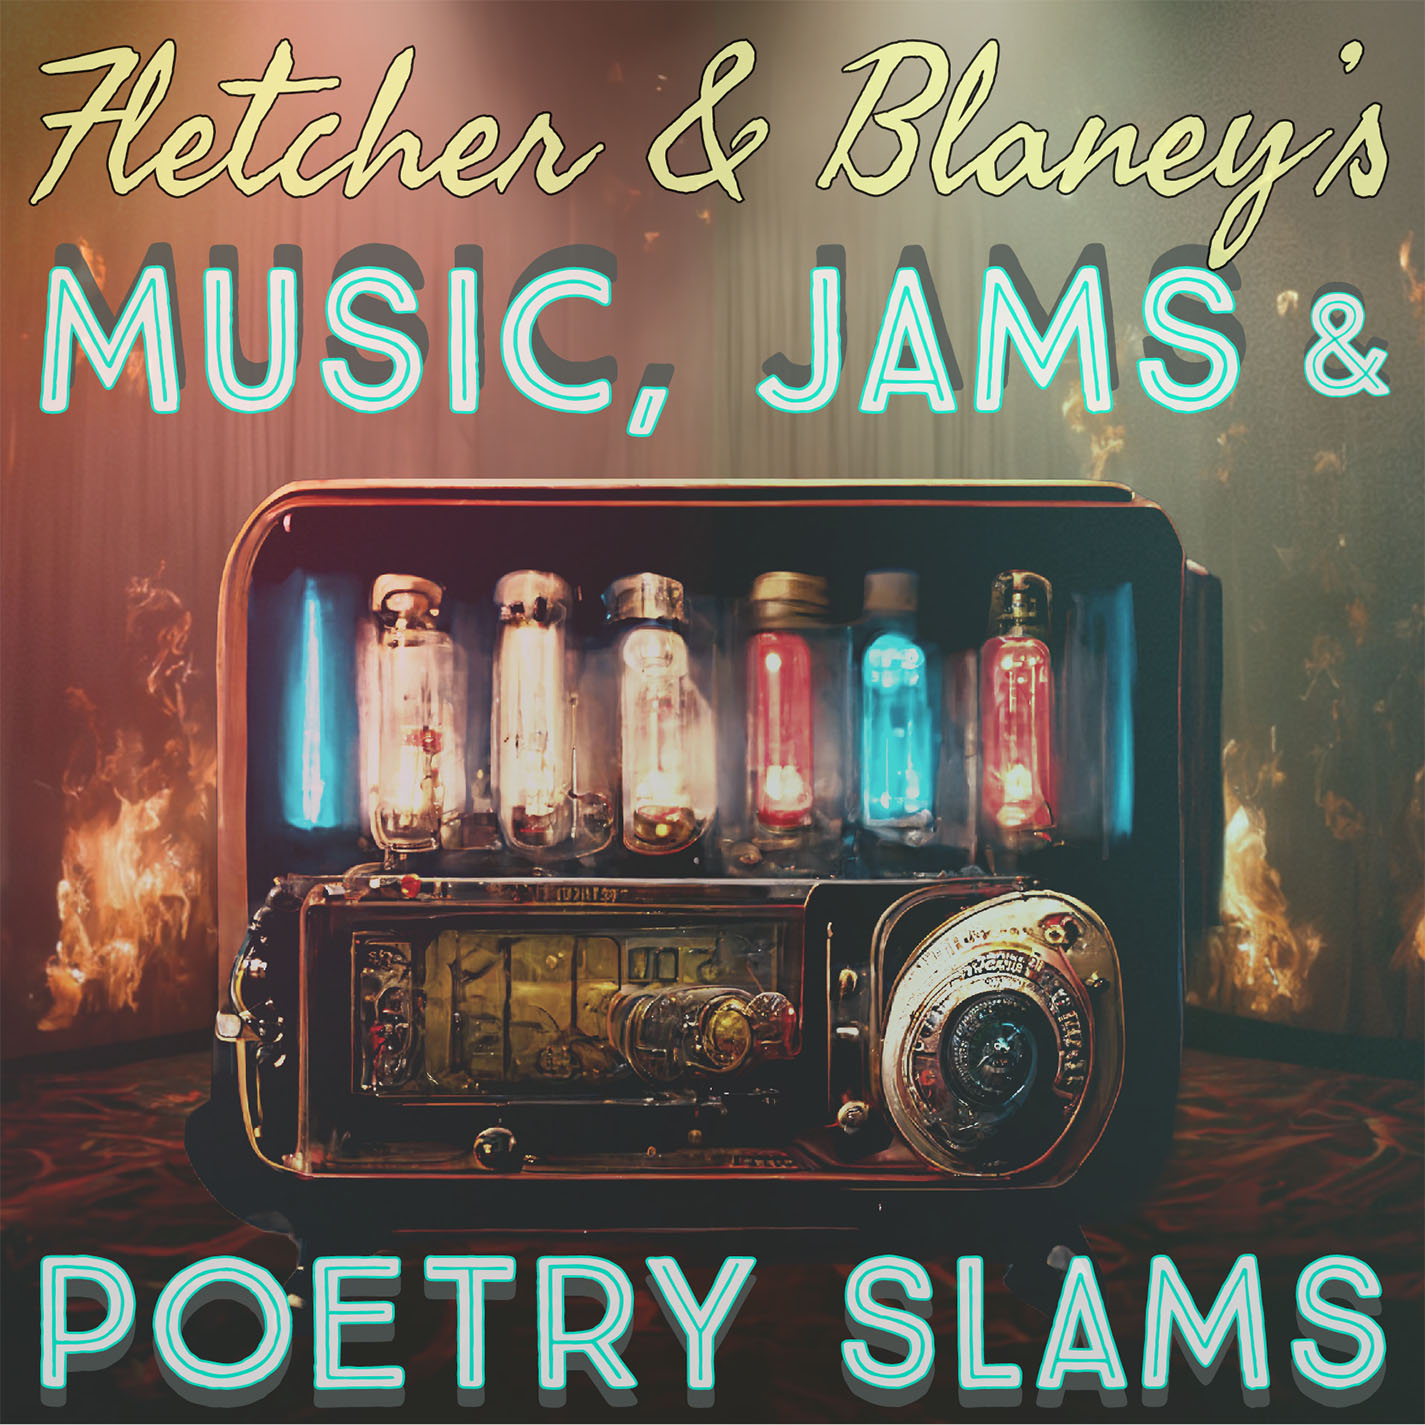 Fletcher and Blaney's Music, Jams, and Poetry Slams